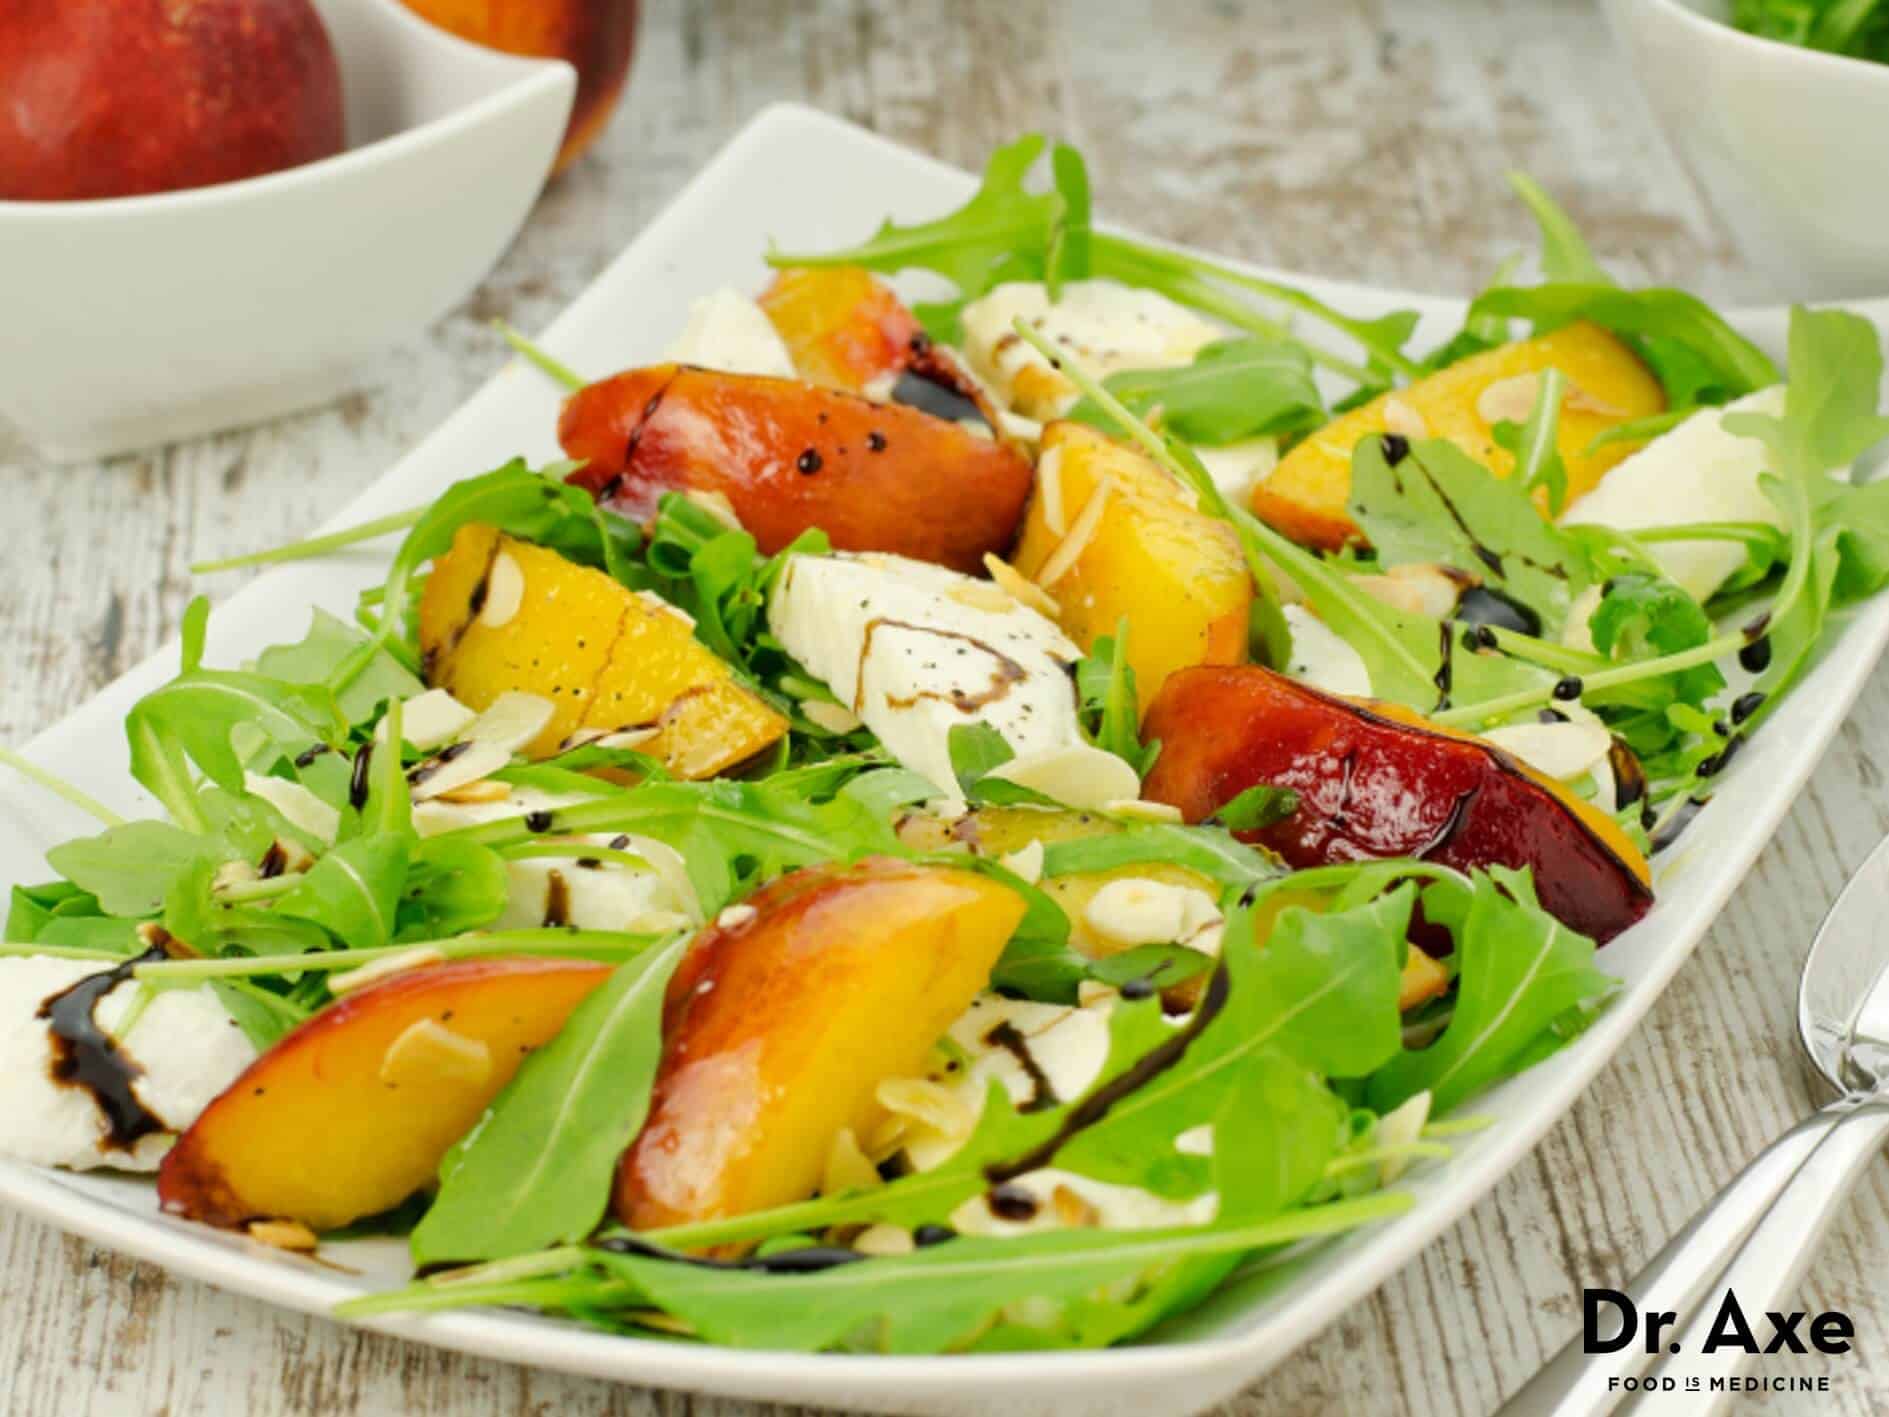 Peach Salad Recipe with Goat Cheese